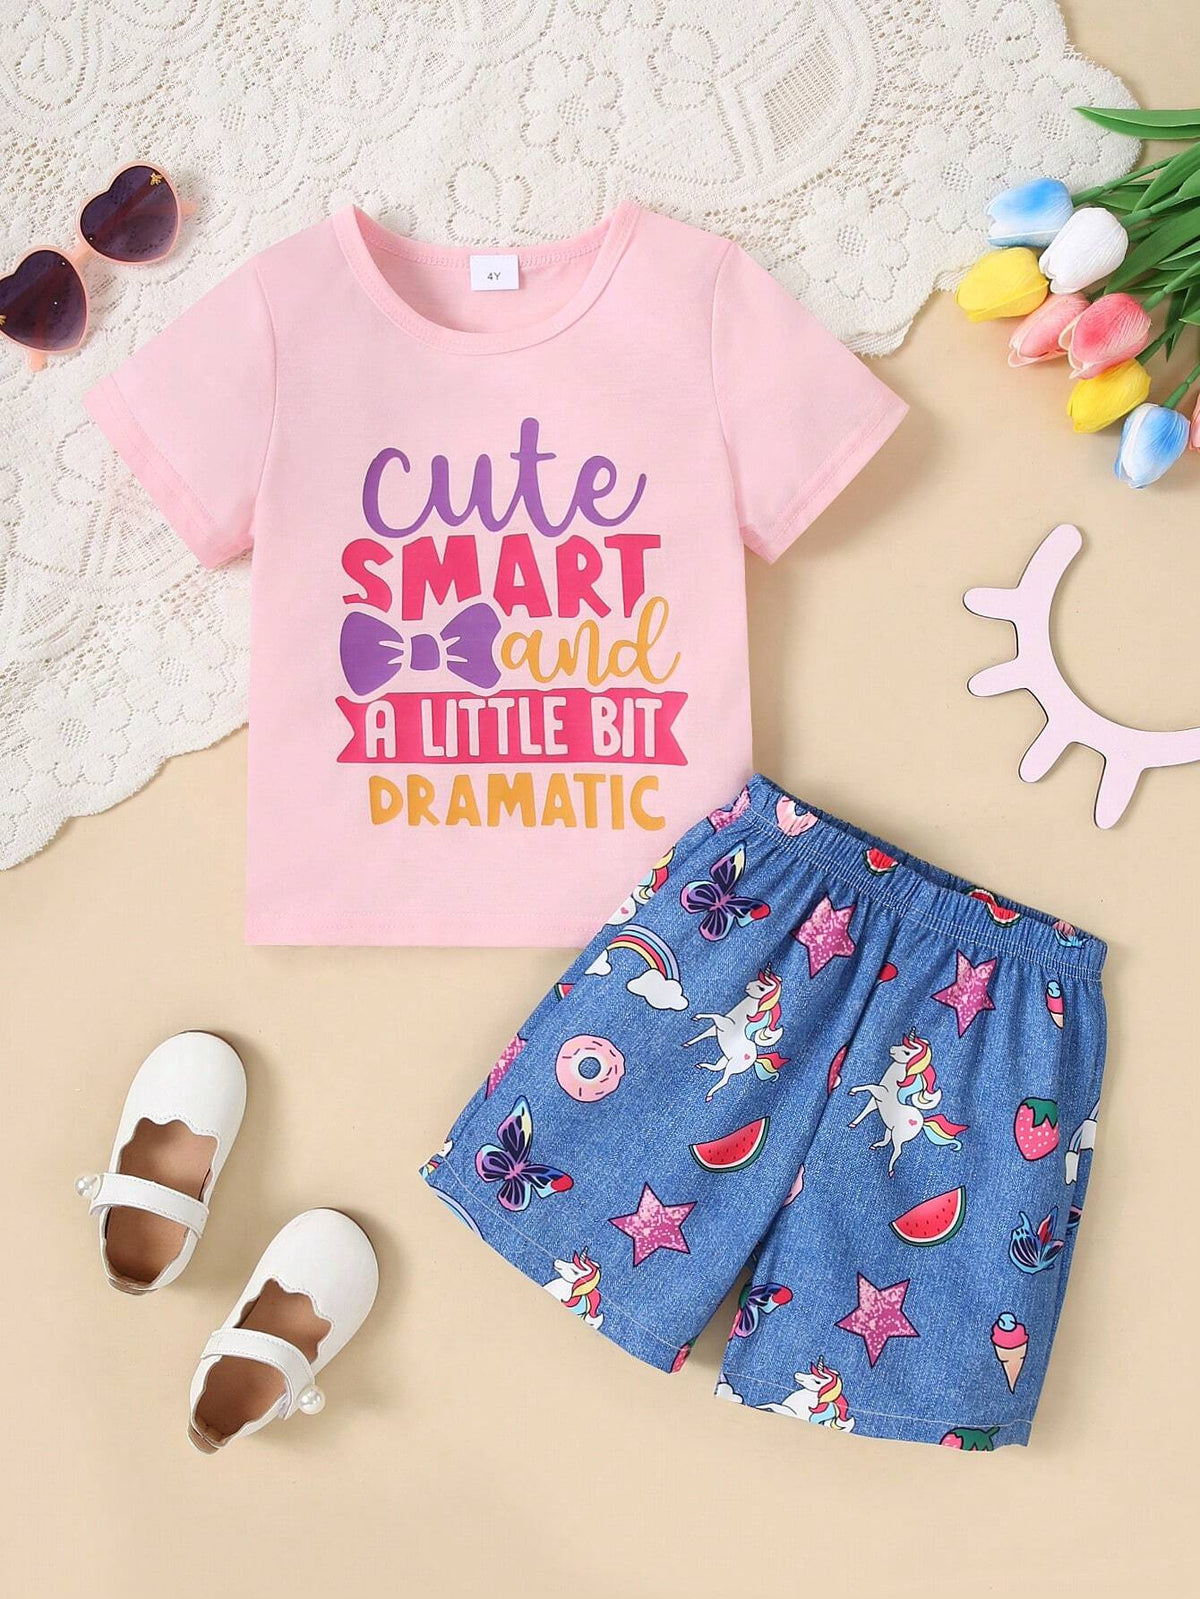 Summer Toddler Girls Casual Letter Print Short Sleeve T-Shirt And Shorts Set